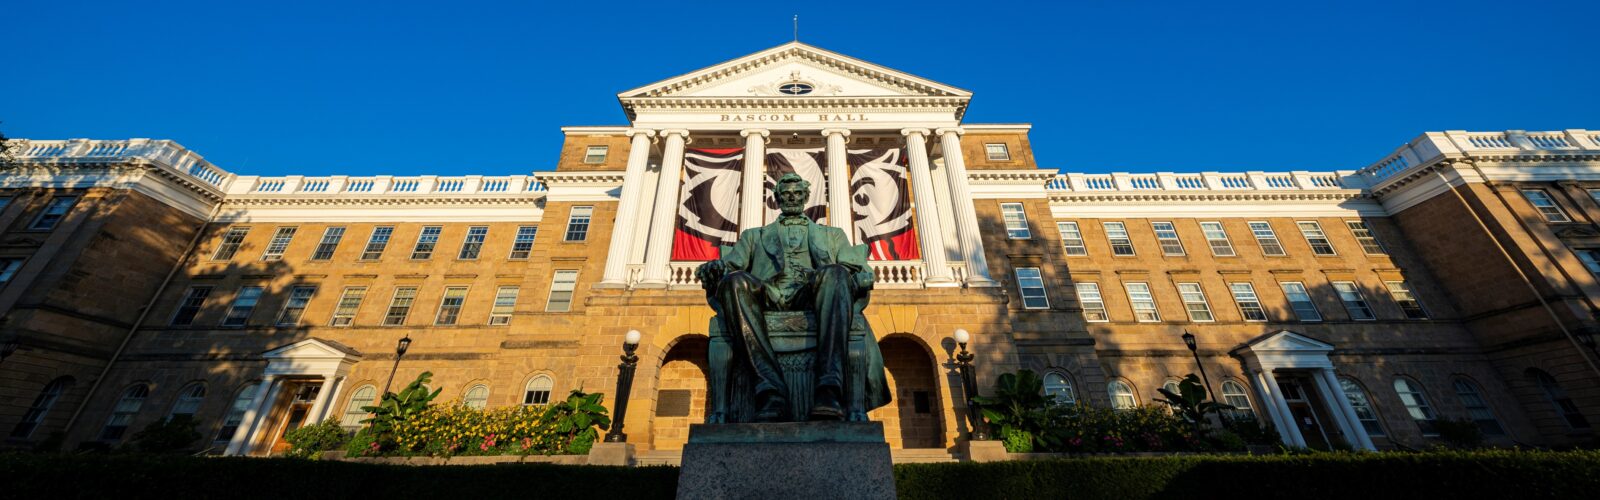 The front of Bascom Hall featuring the statue of Abe Lincoln, a Bucky Badger Banner and a blue sky background